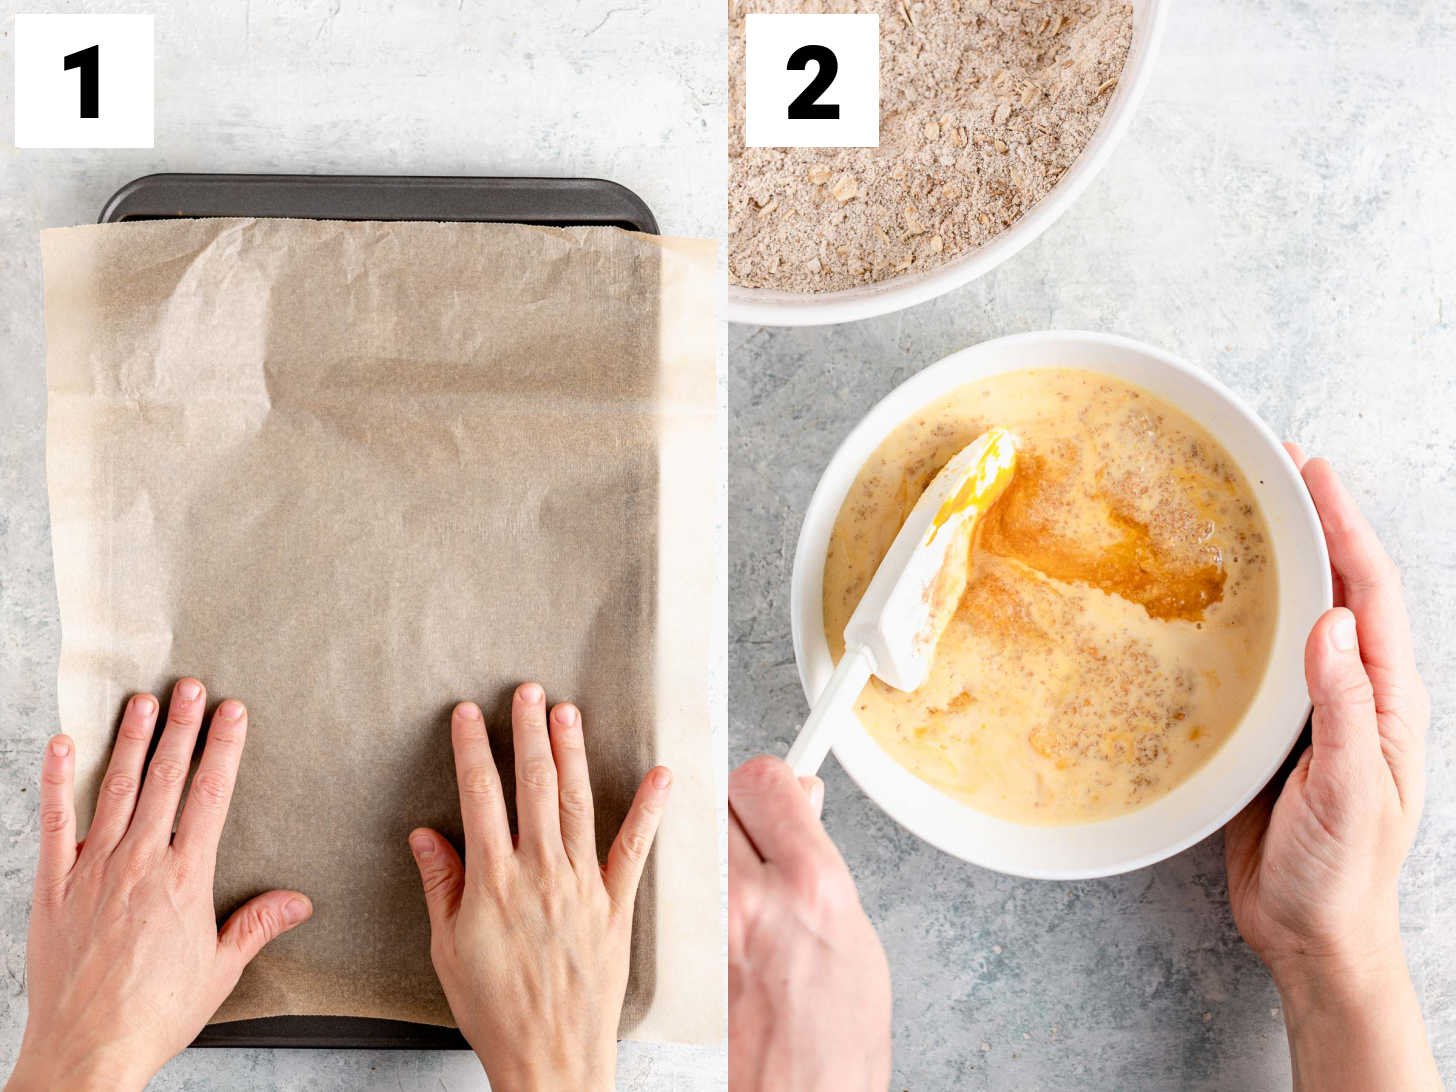 line a baking sheet with parchment, mixing the wet and dry mixes